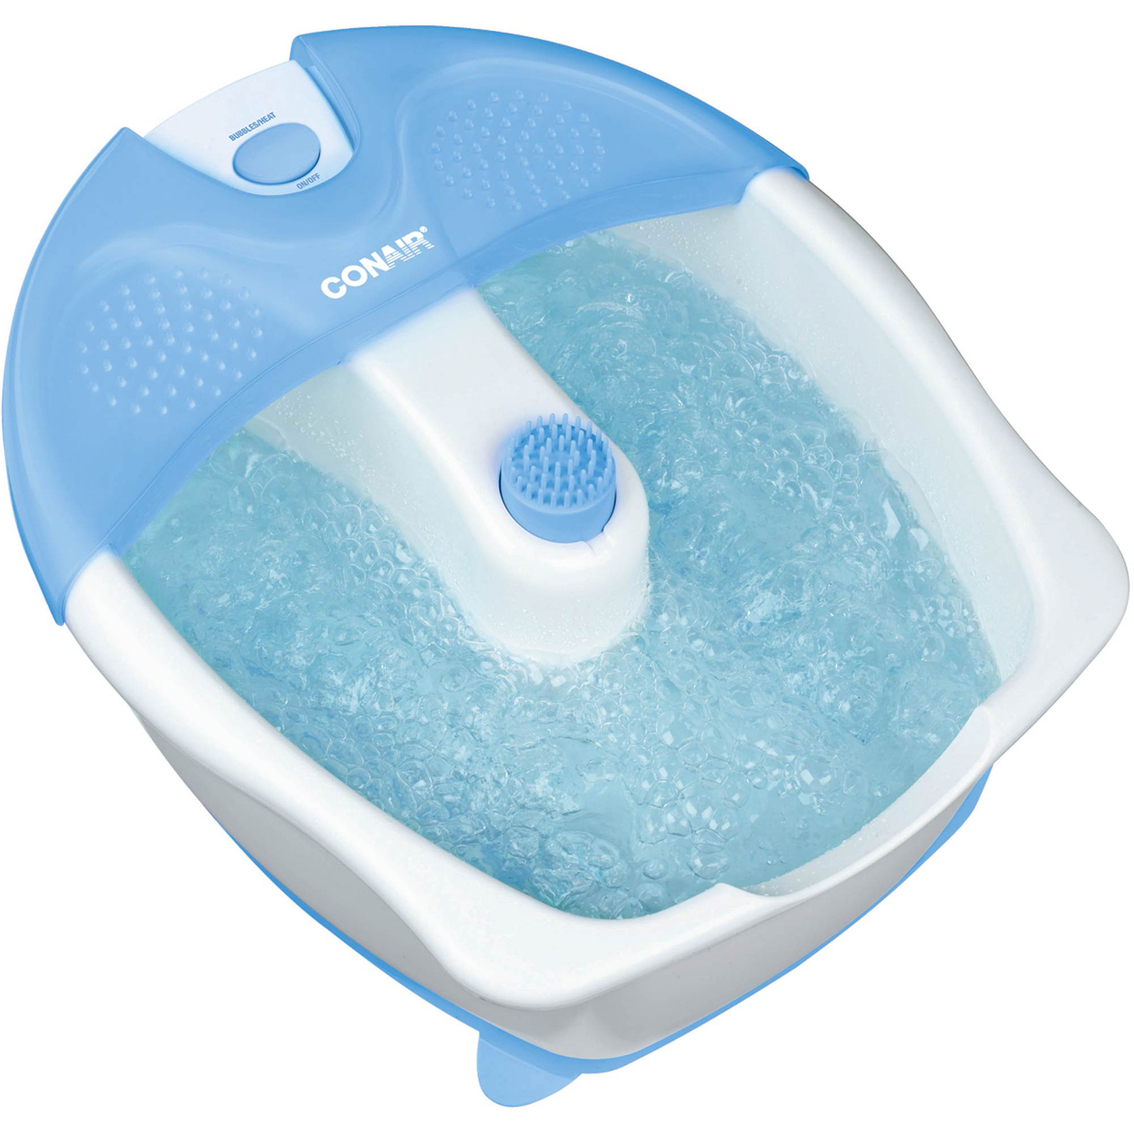 Conair Foot Bath with Bubbles and Heat - Image 1 of 2